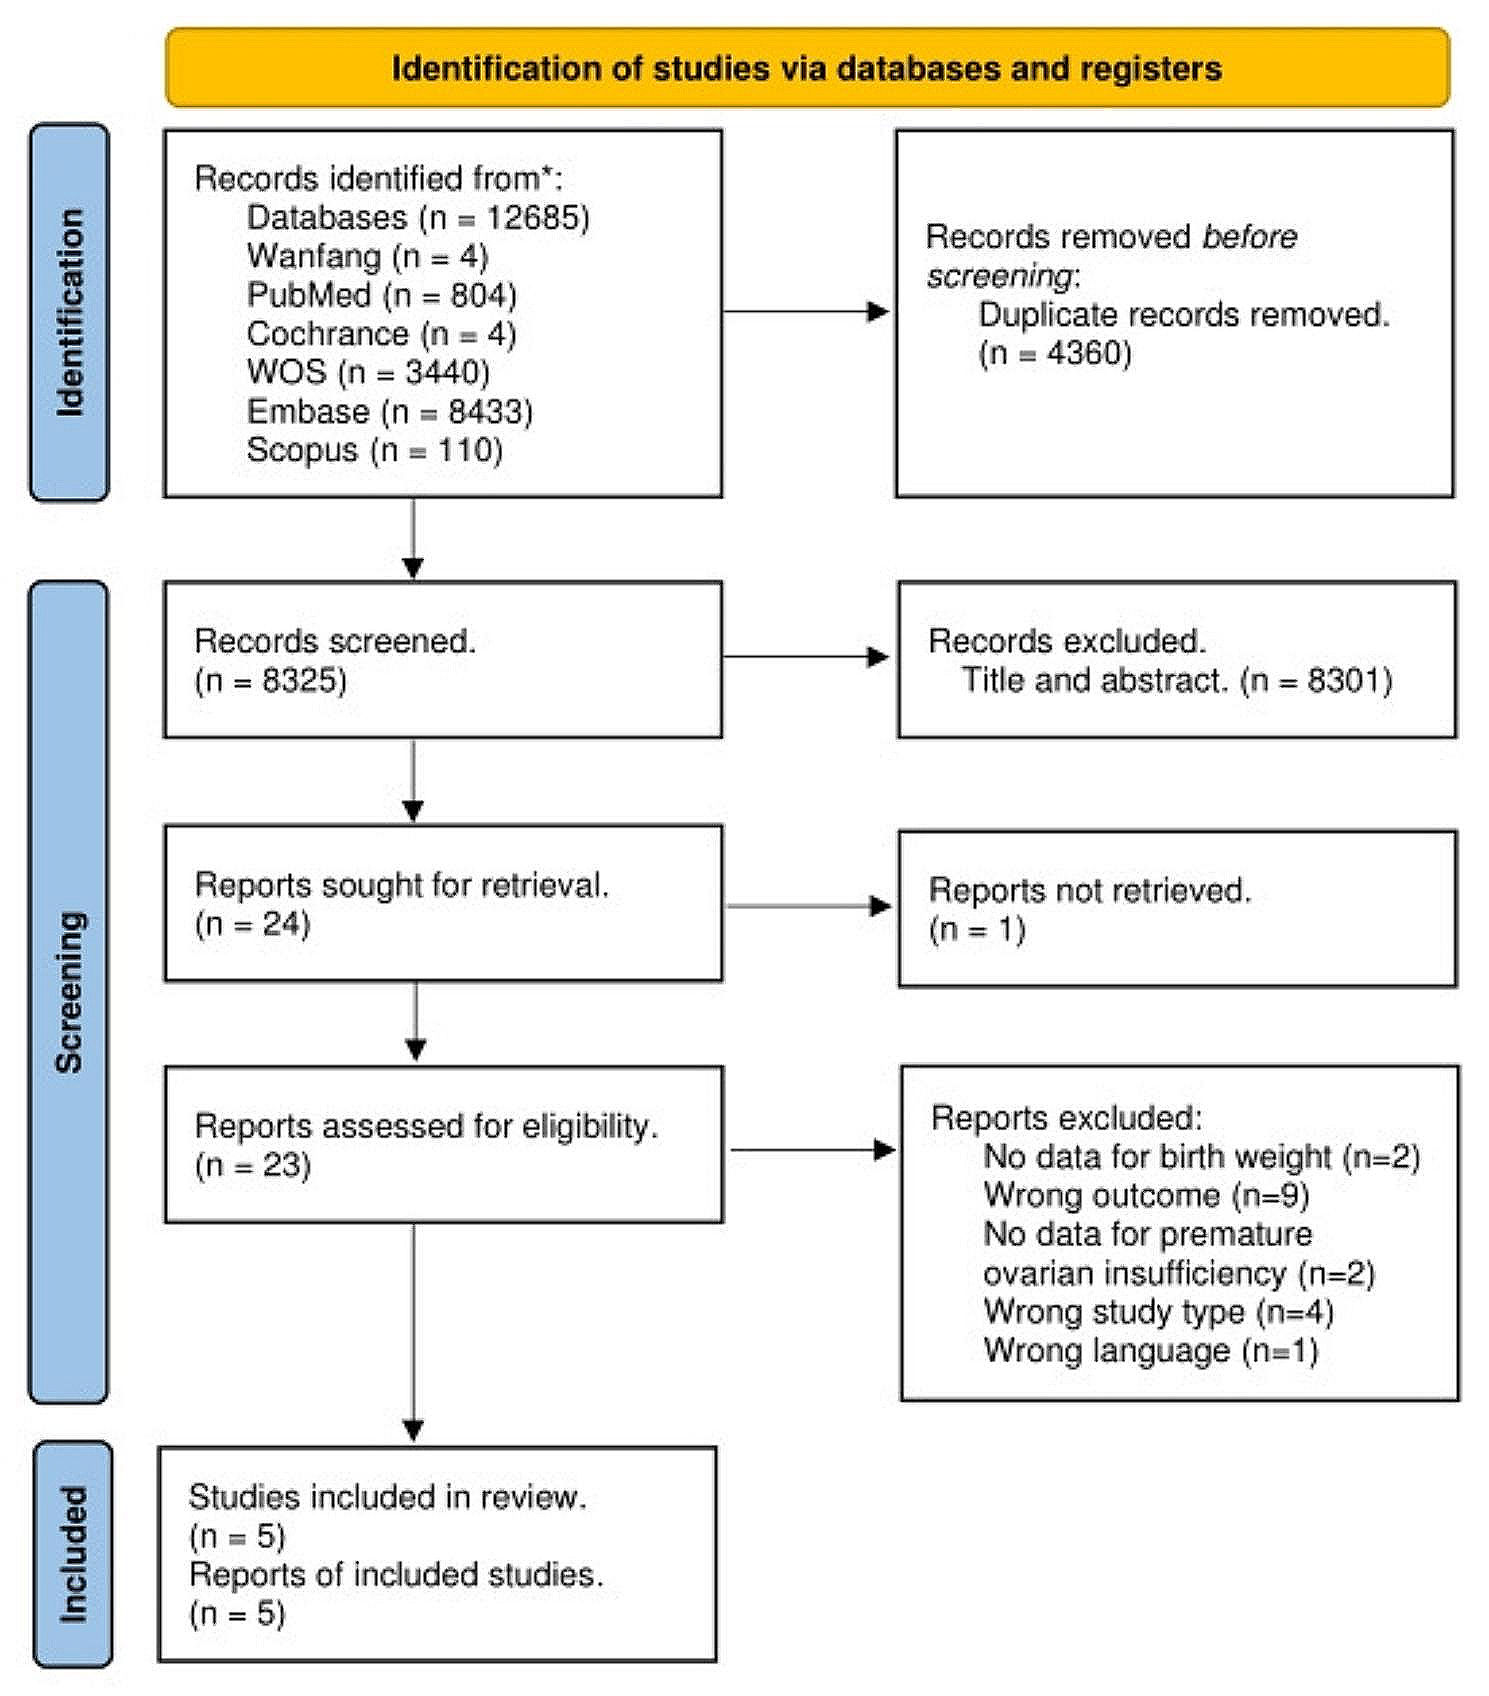 Birth weight and premature ovarian insufficiency: a systematic review and meta-analysis